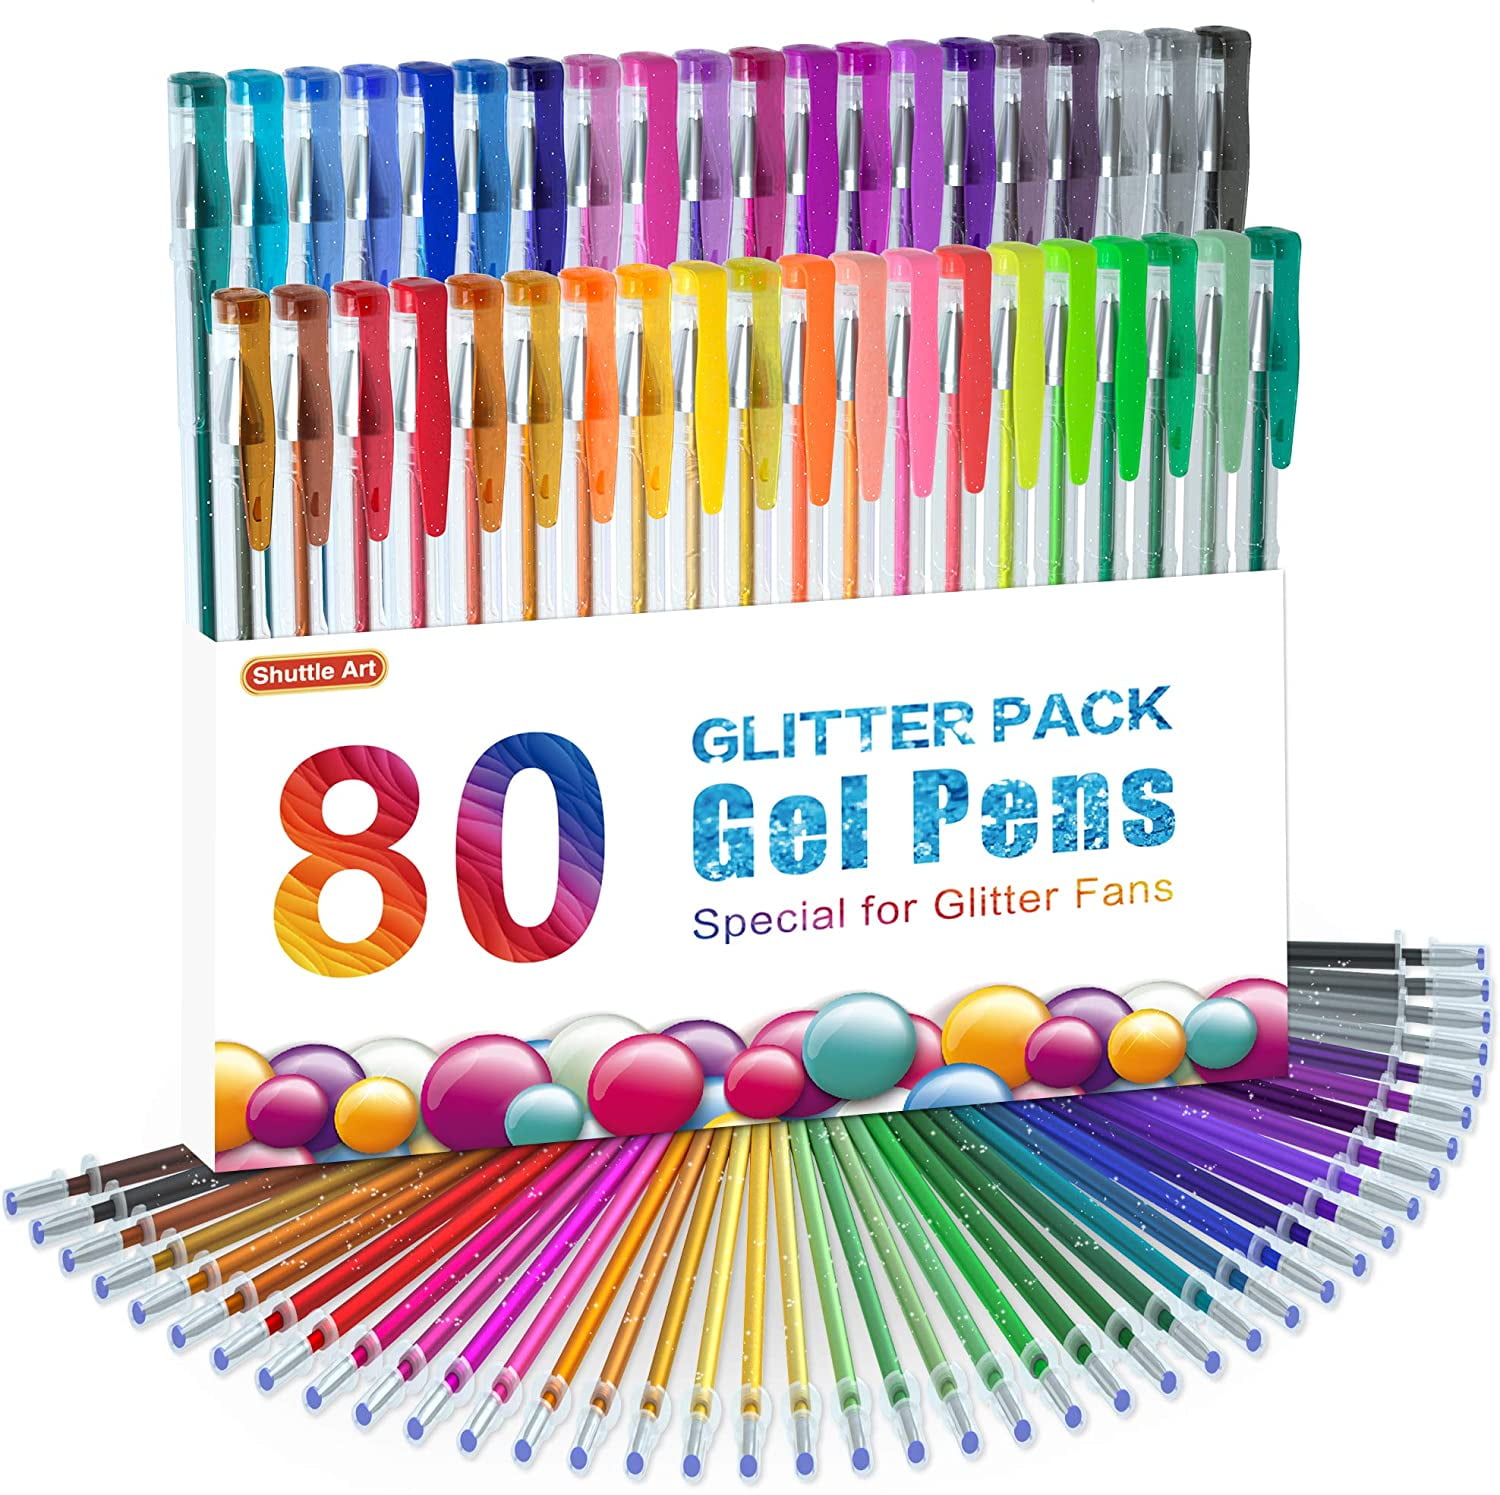 60 Coloring Gel Pens Adult Coloring Books, Drawing, Bible Study